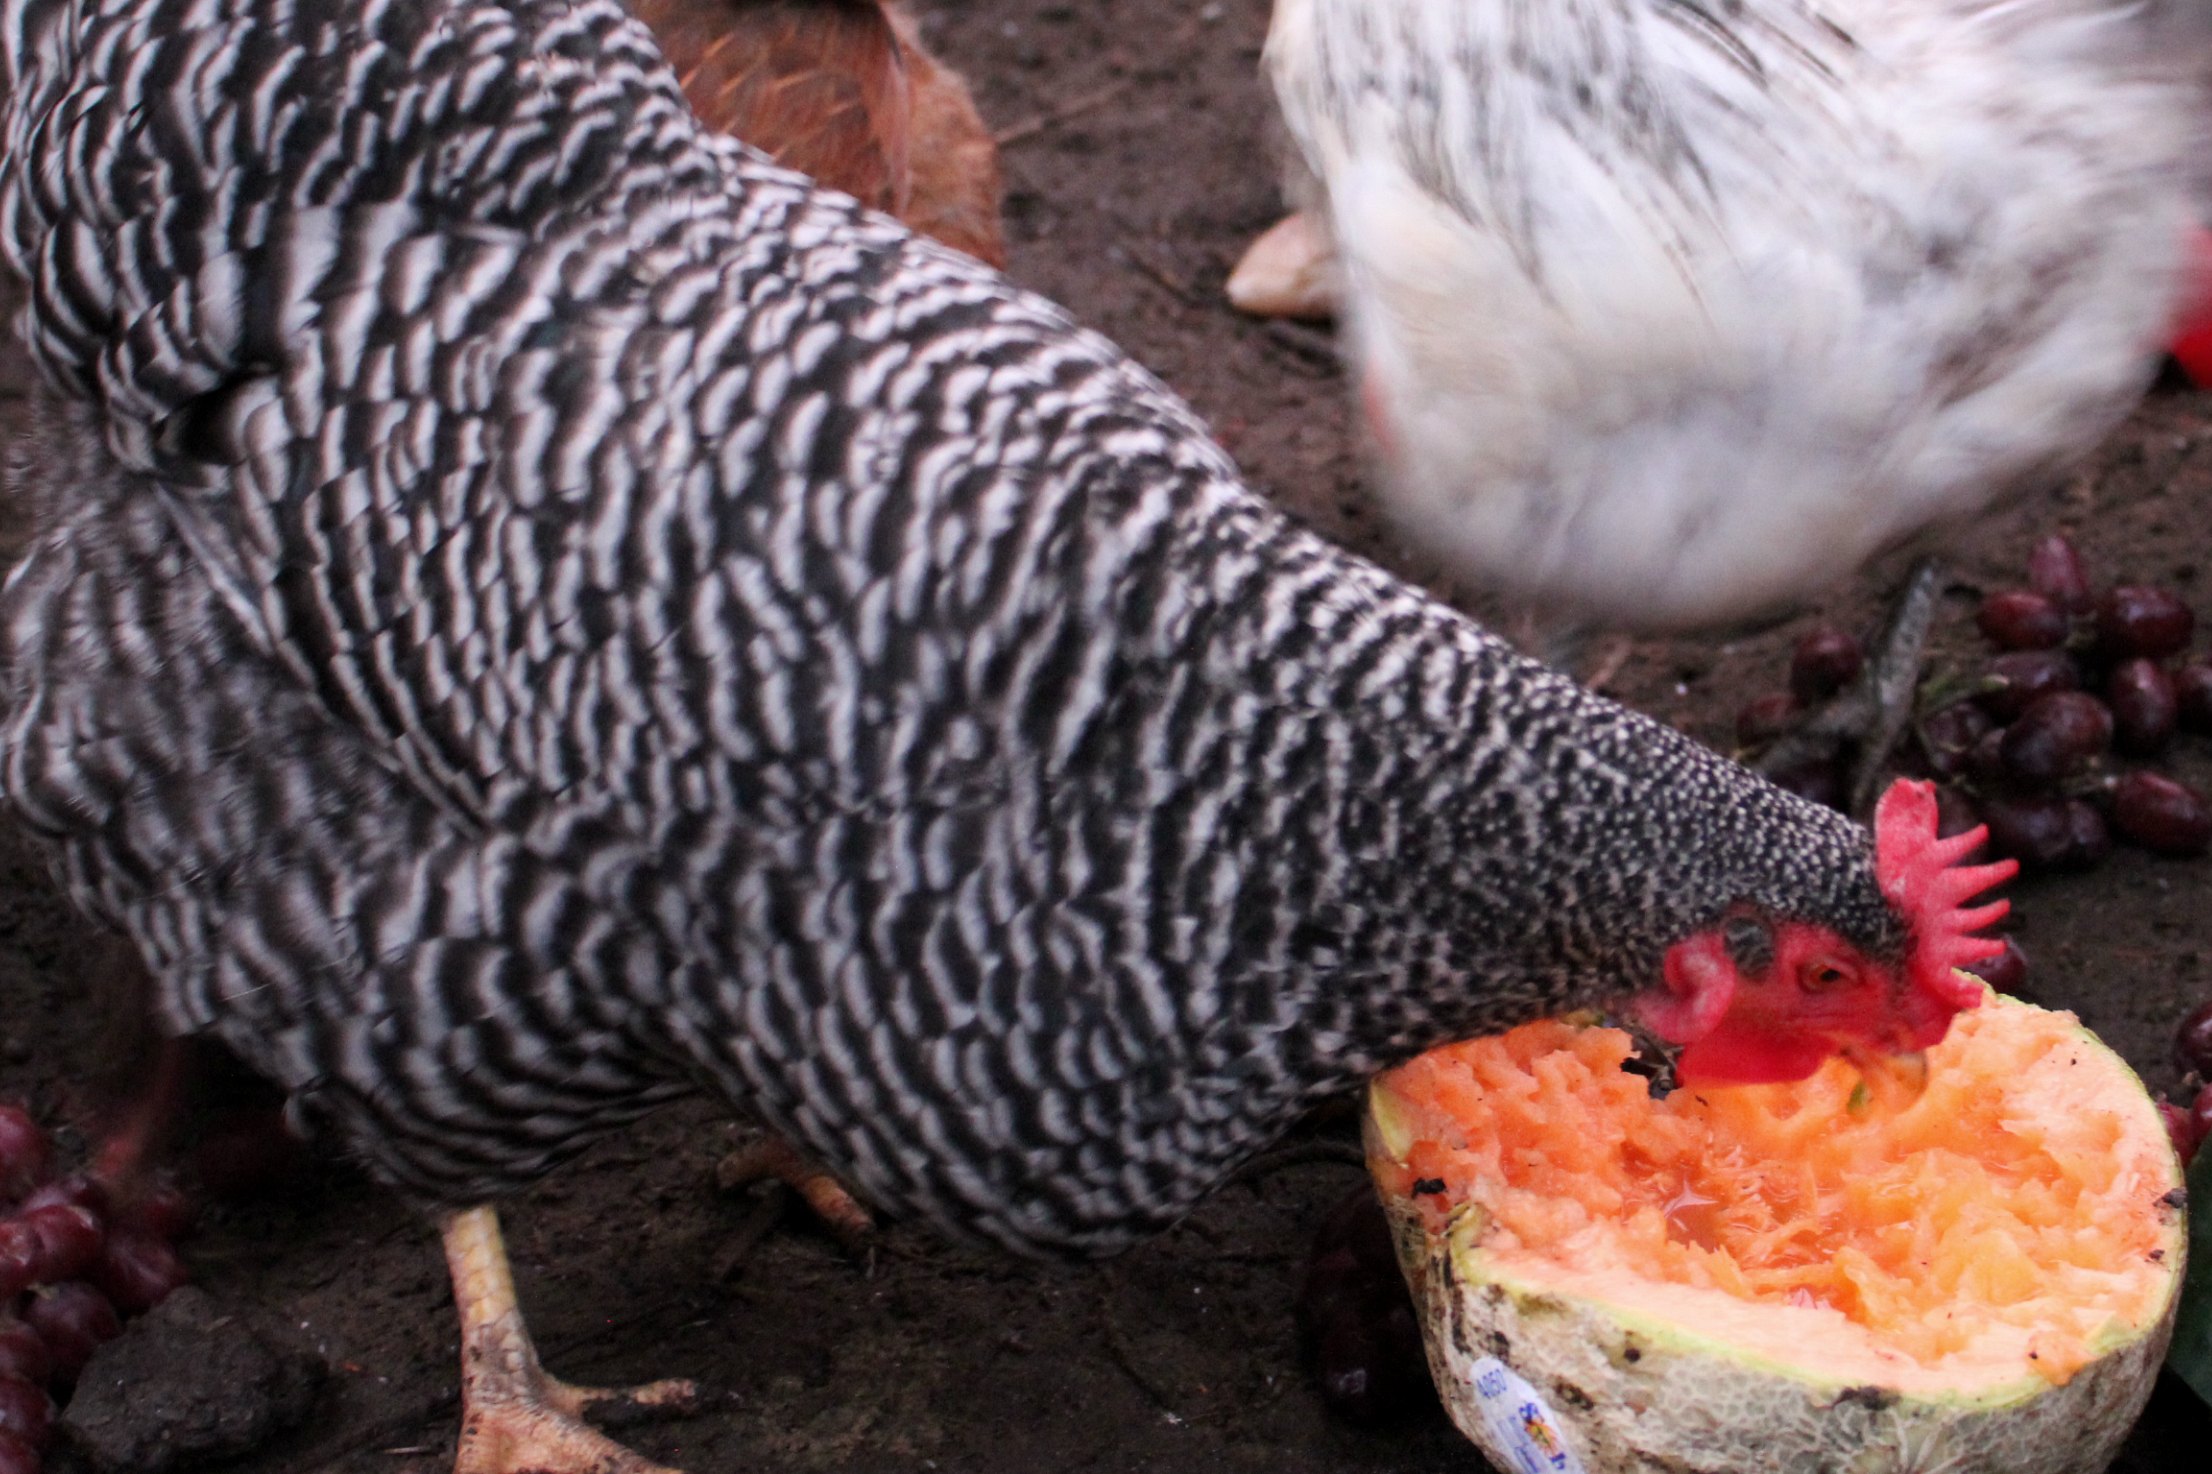 Food Waste In America – Chickens Love Cantaloupes